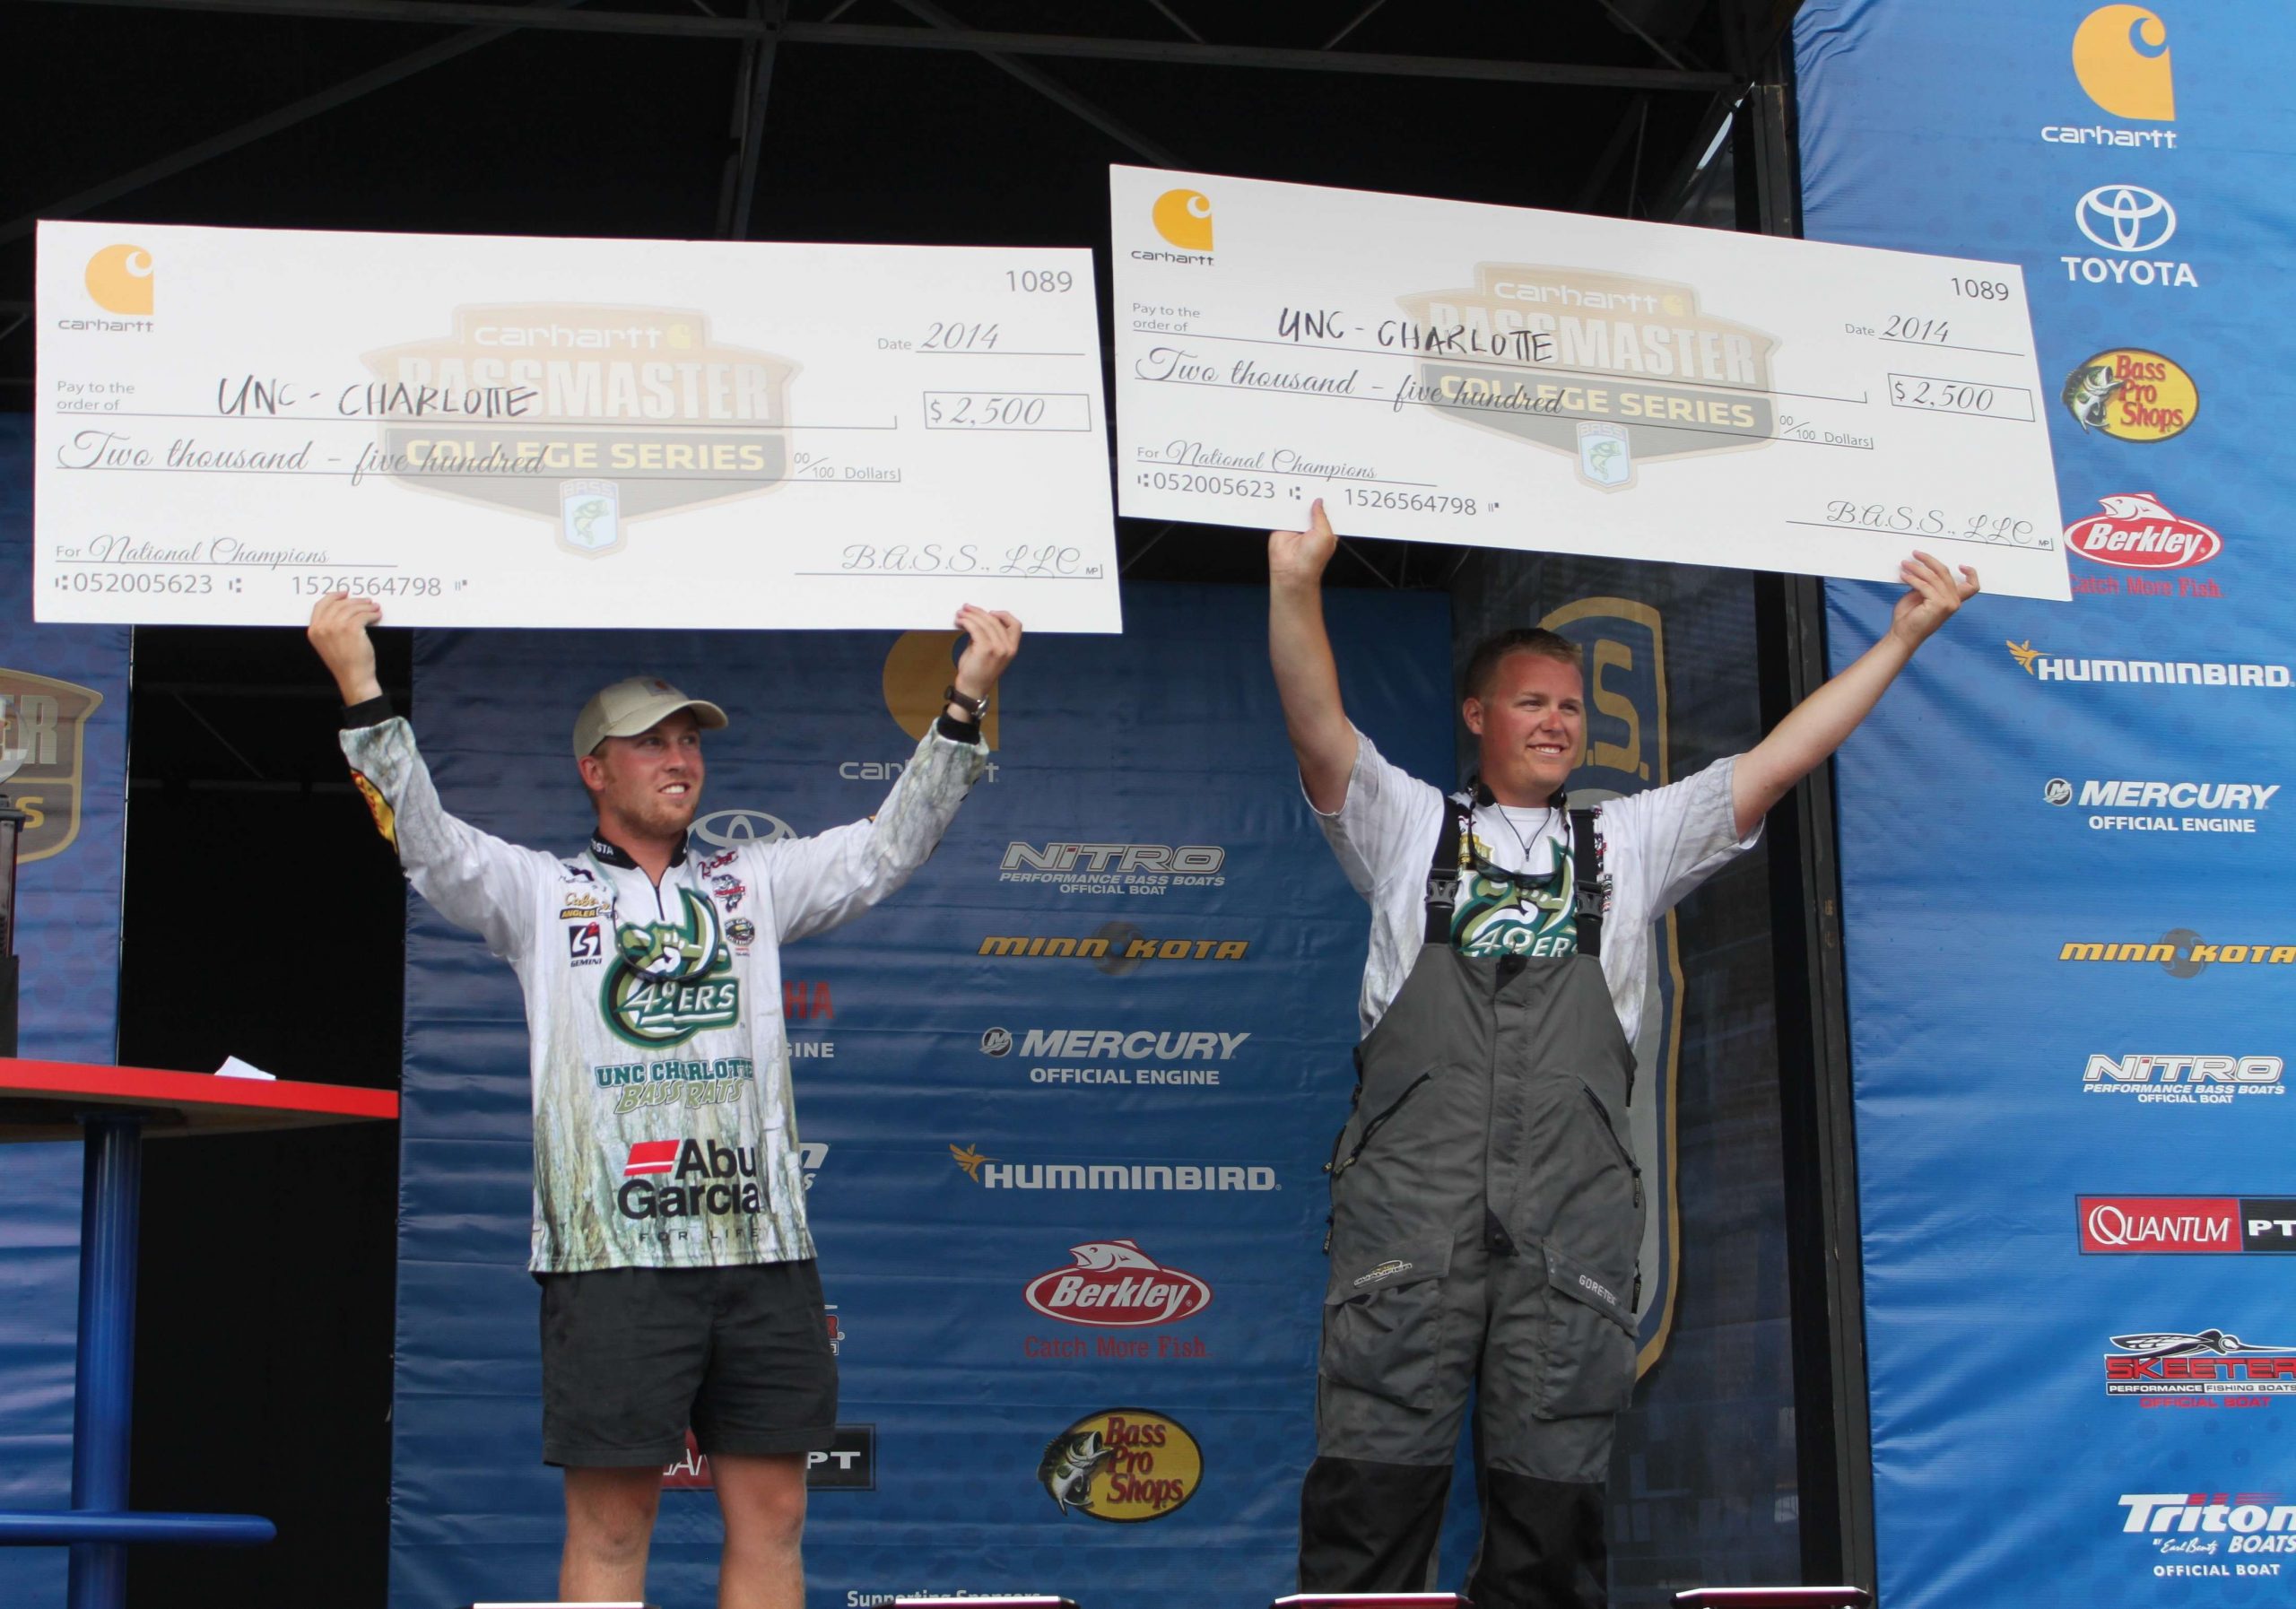 Carhartt also awarded the National Champions with $5,000. 